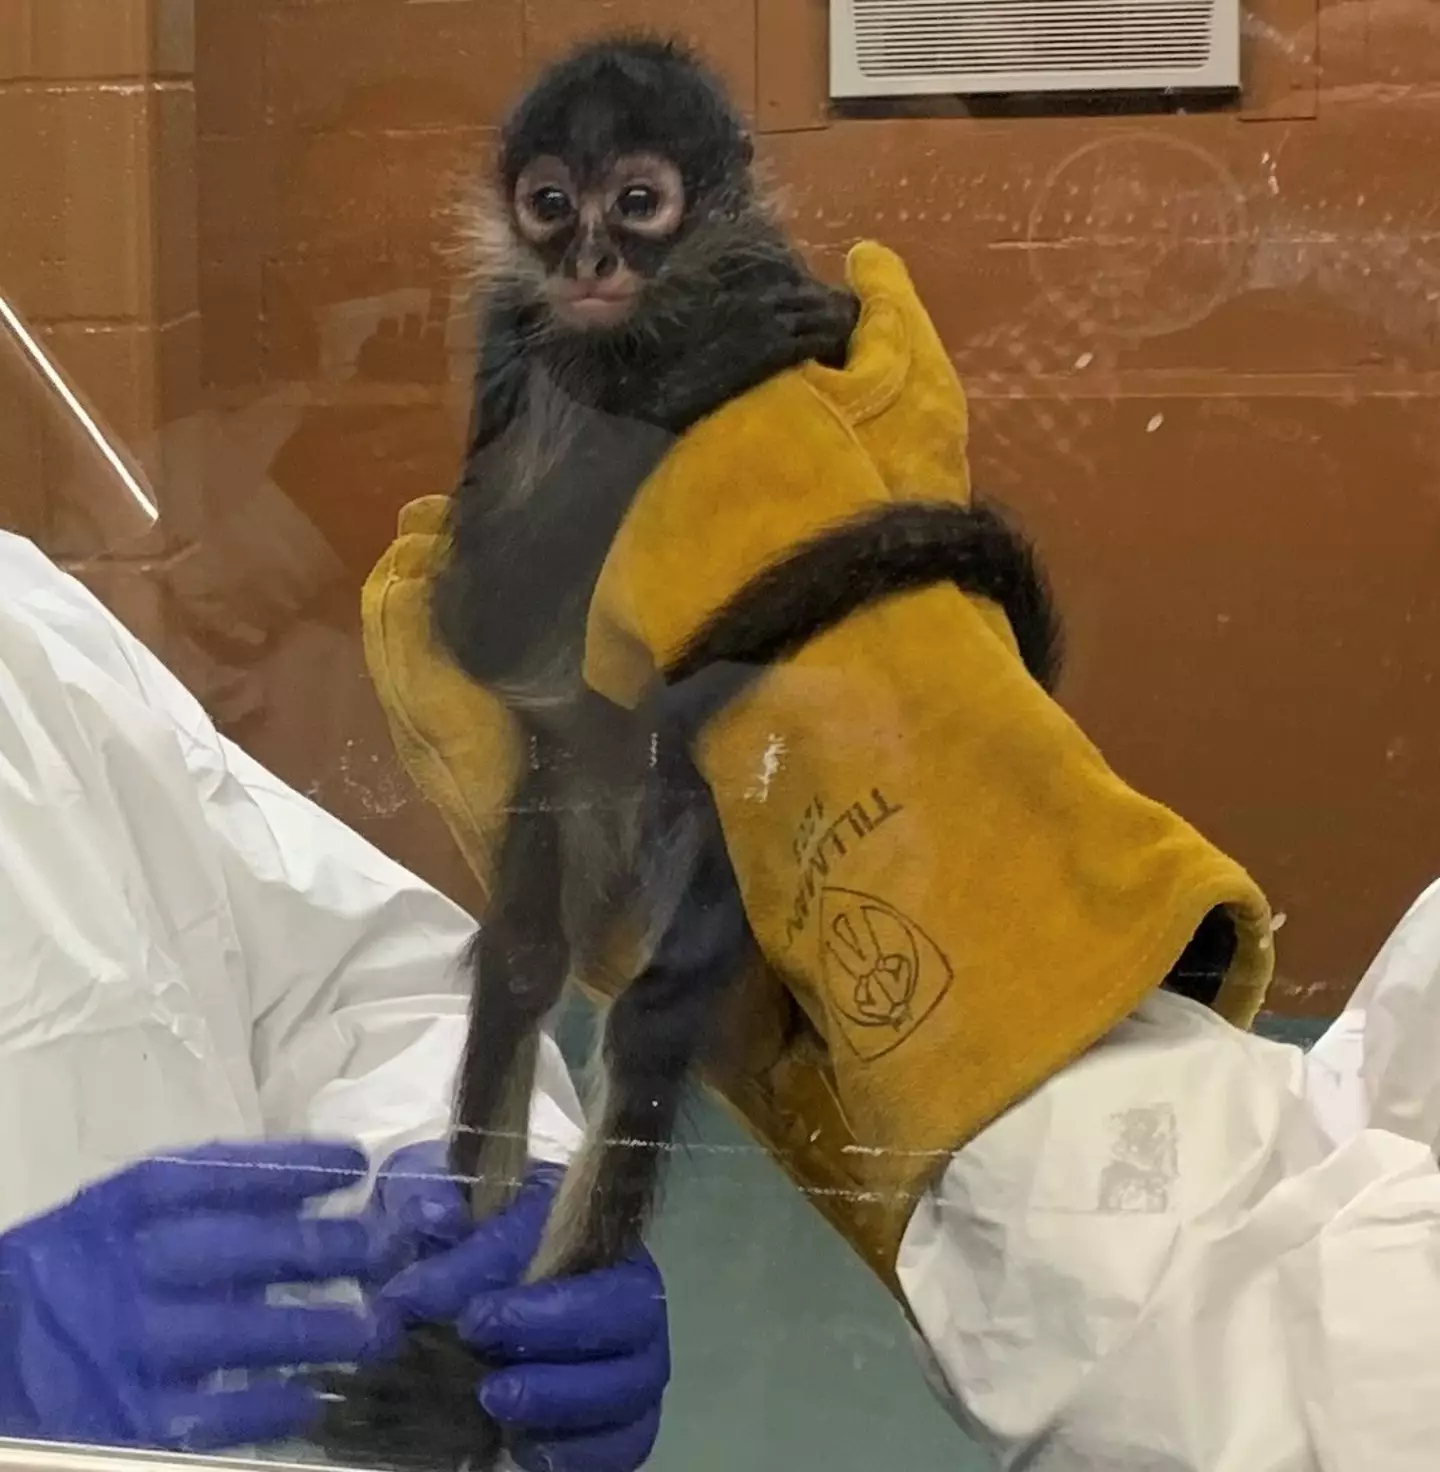 The endangered spider monkey was rescued and sent to an animal shelter.